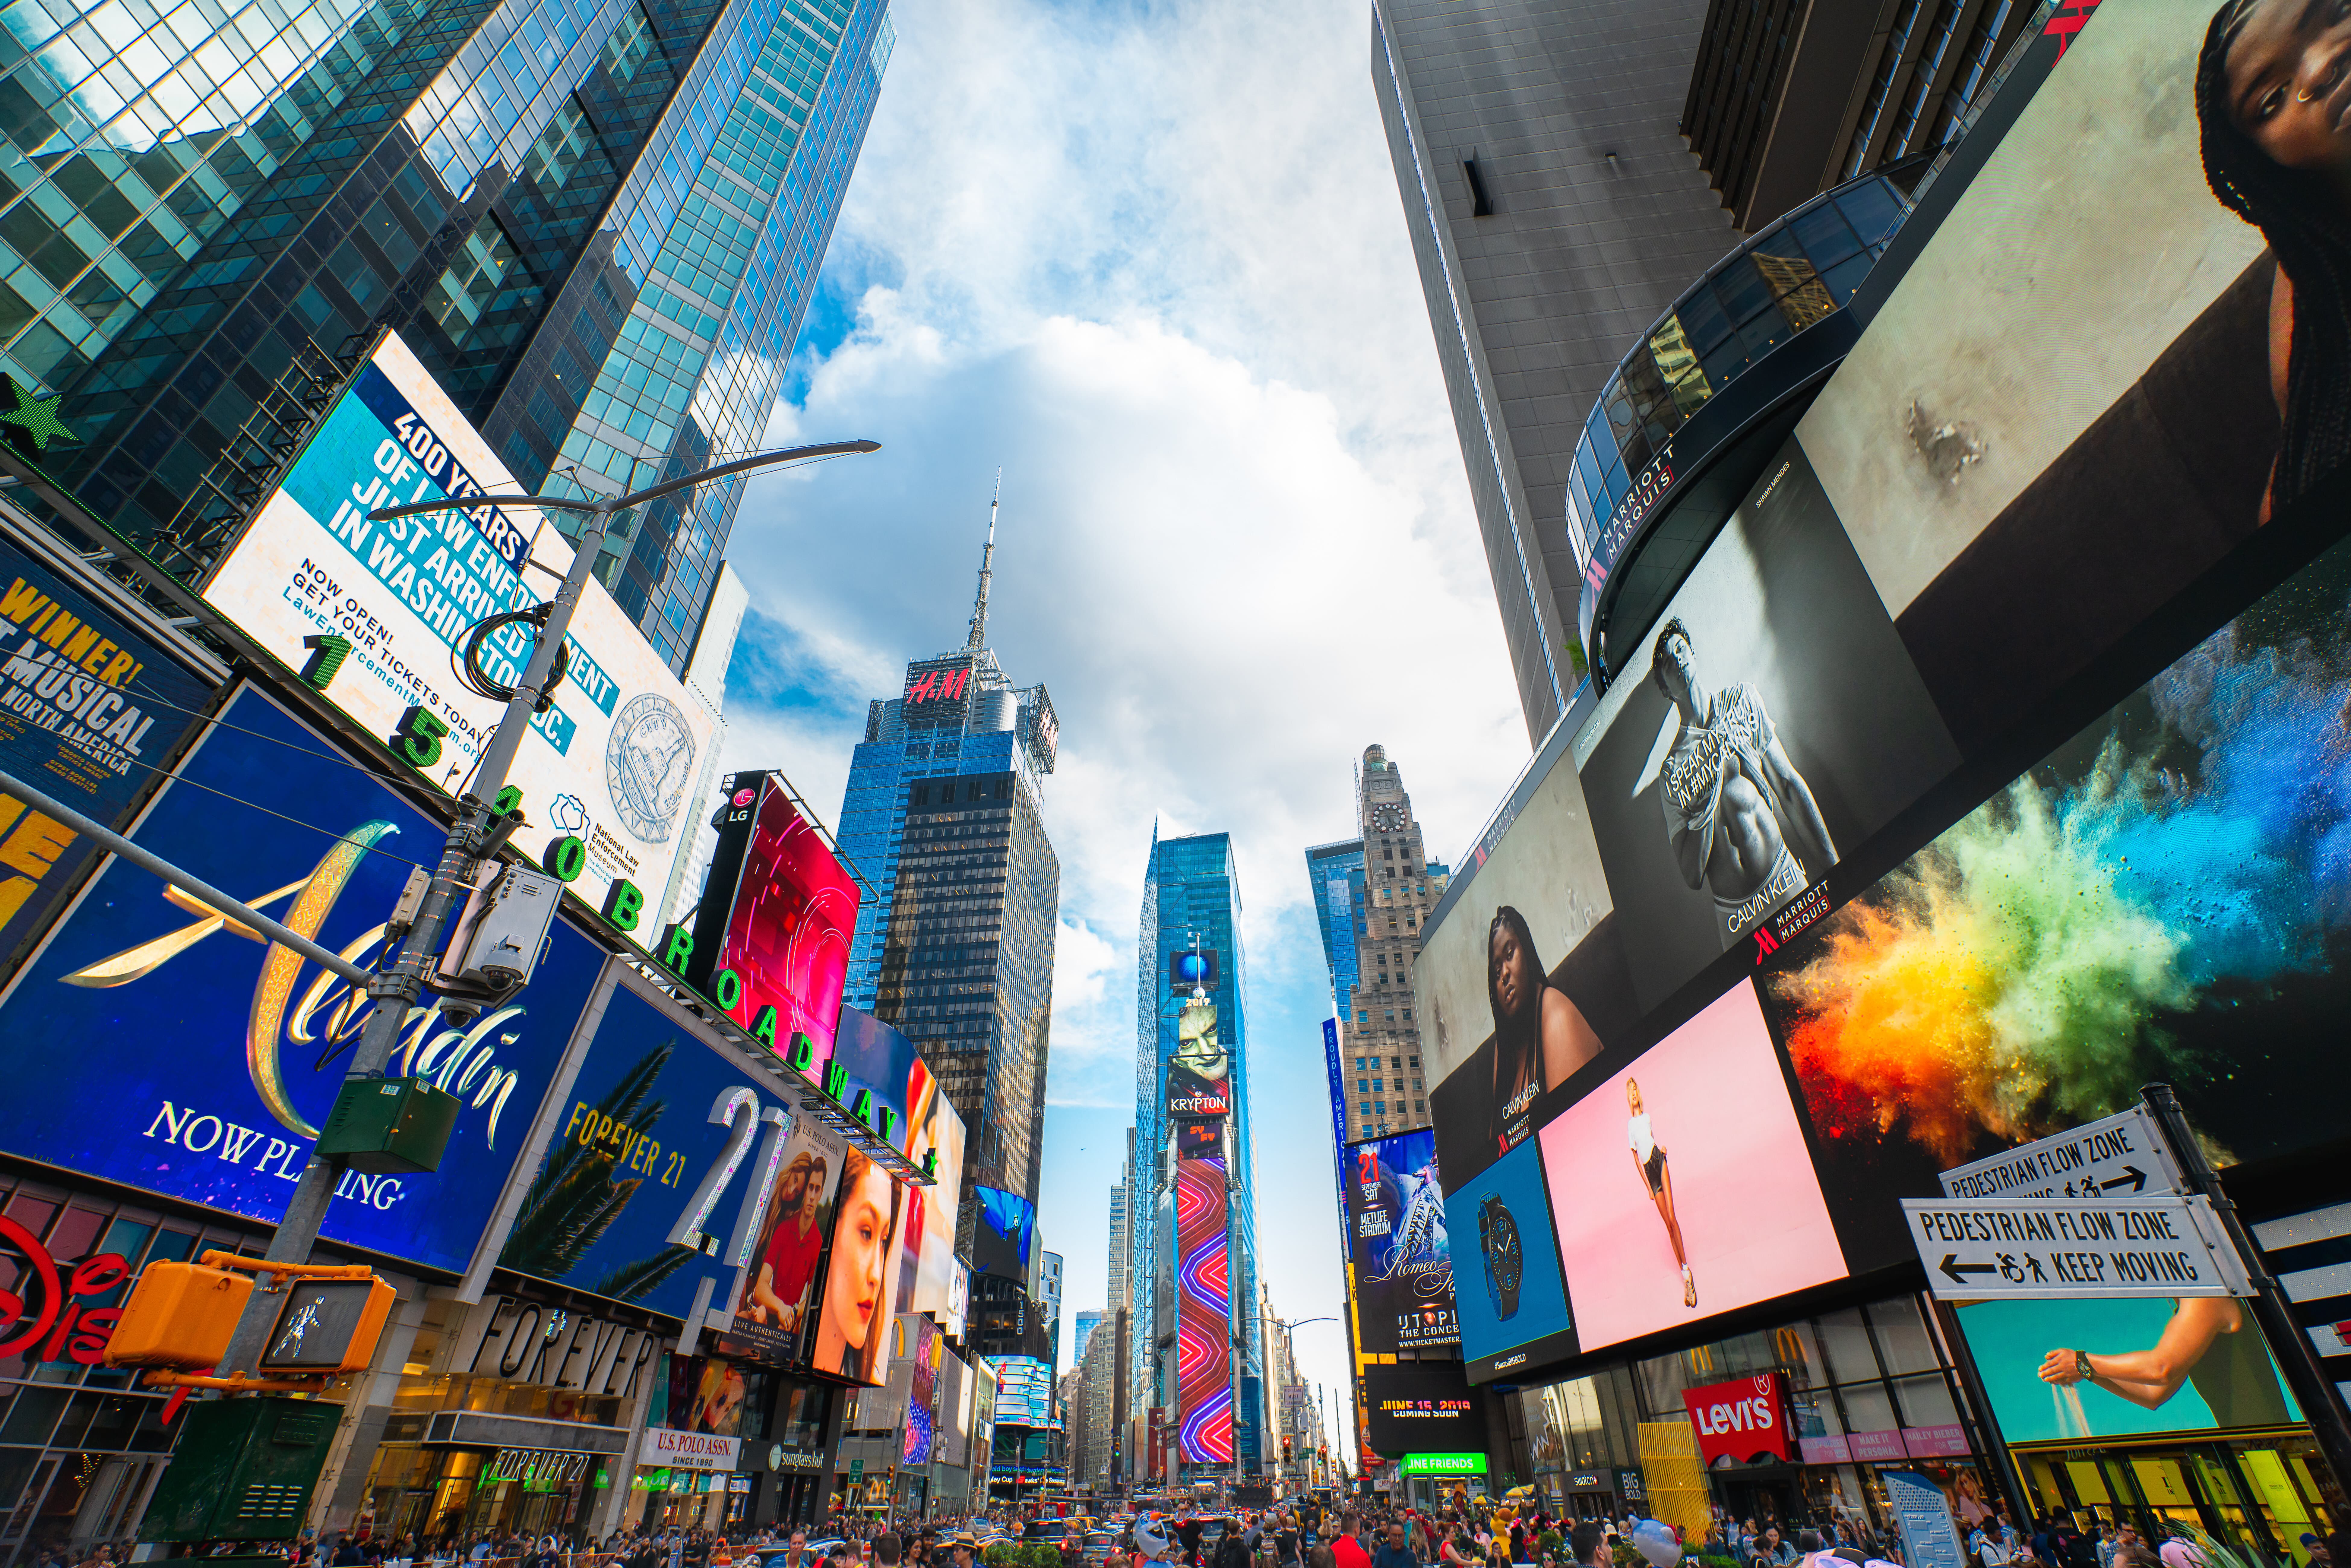 asiapac-drive-success-with-pdooh-advertising-the-future-of-digital-marketing-new-york-times-square-pdooh-billboards (2).jpg